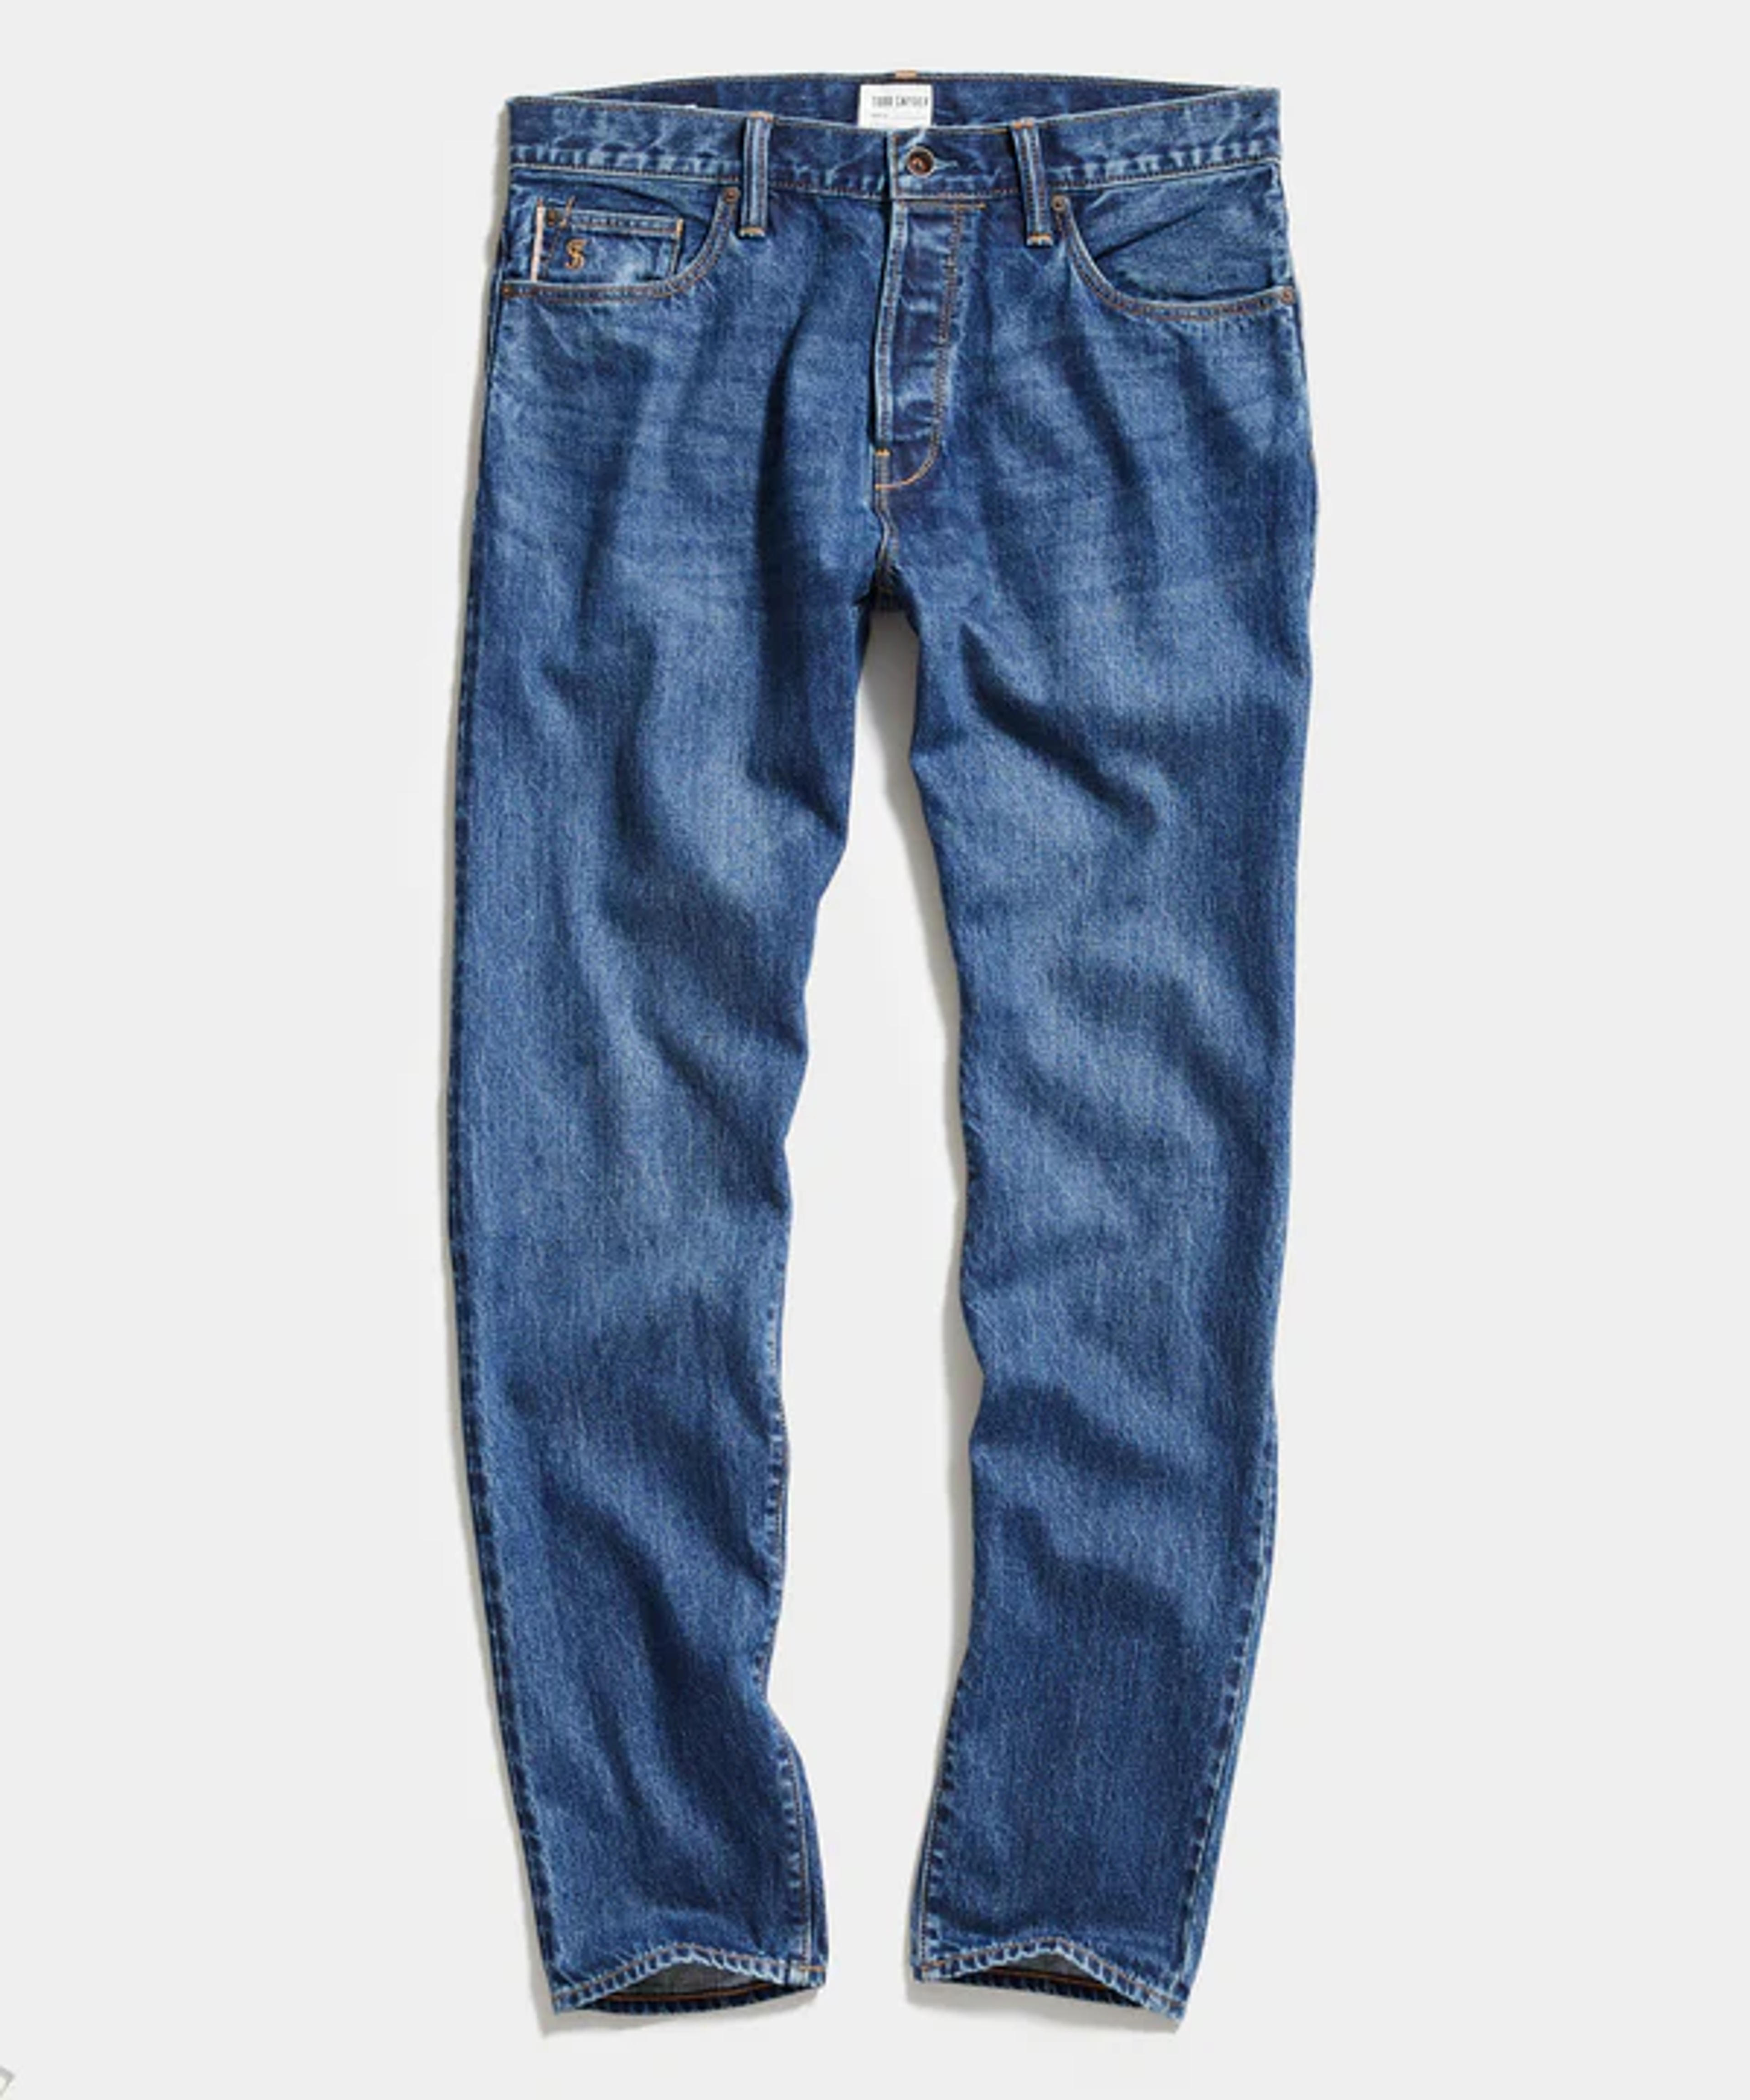 Straight Fit Selvedge Jean in Mid-Blue Wash - Todd Snyder